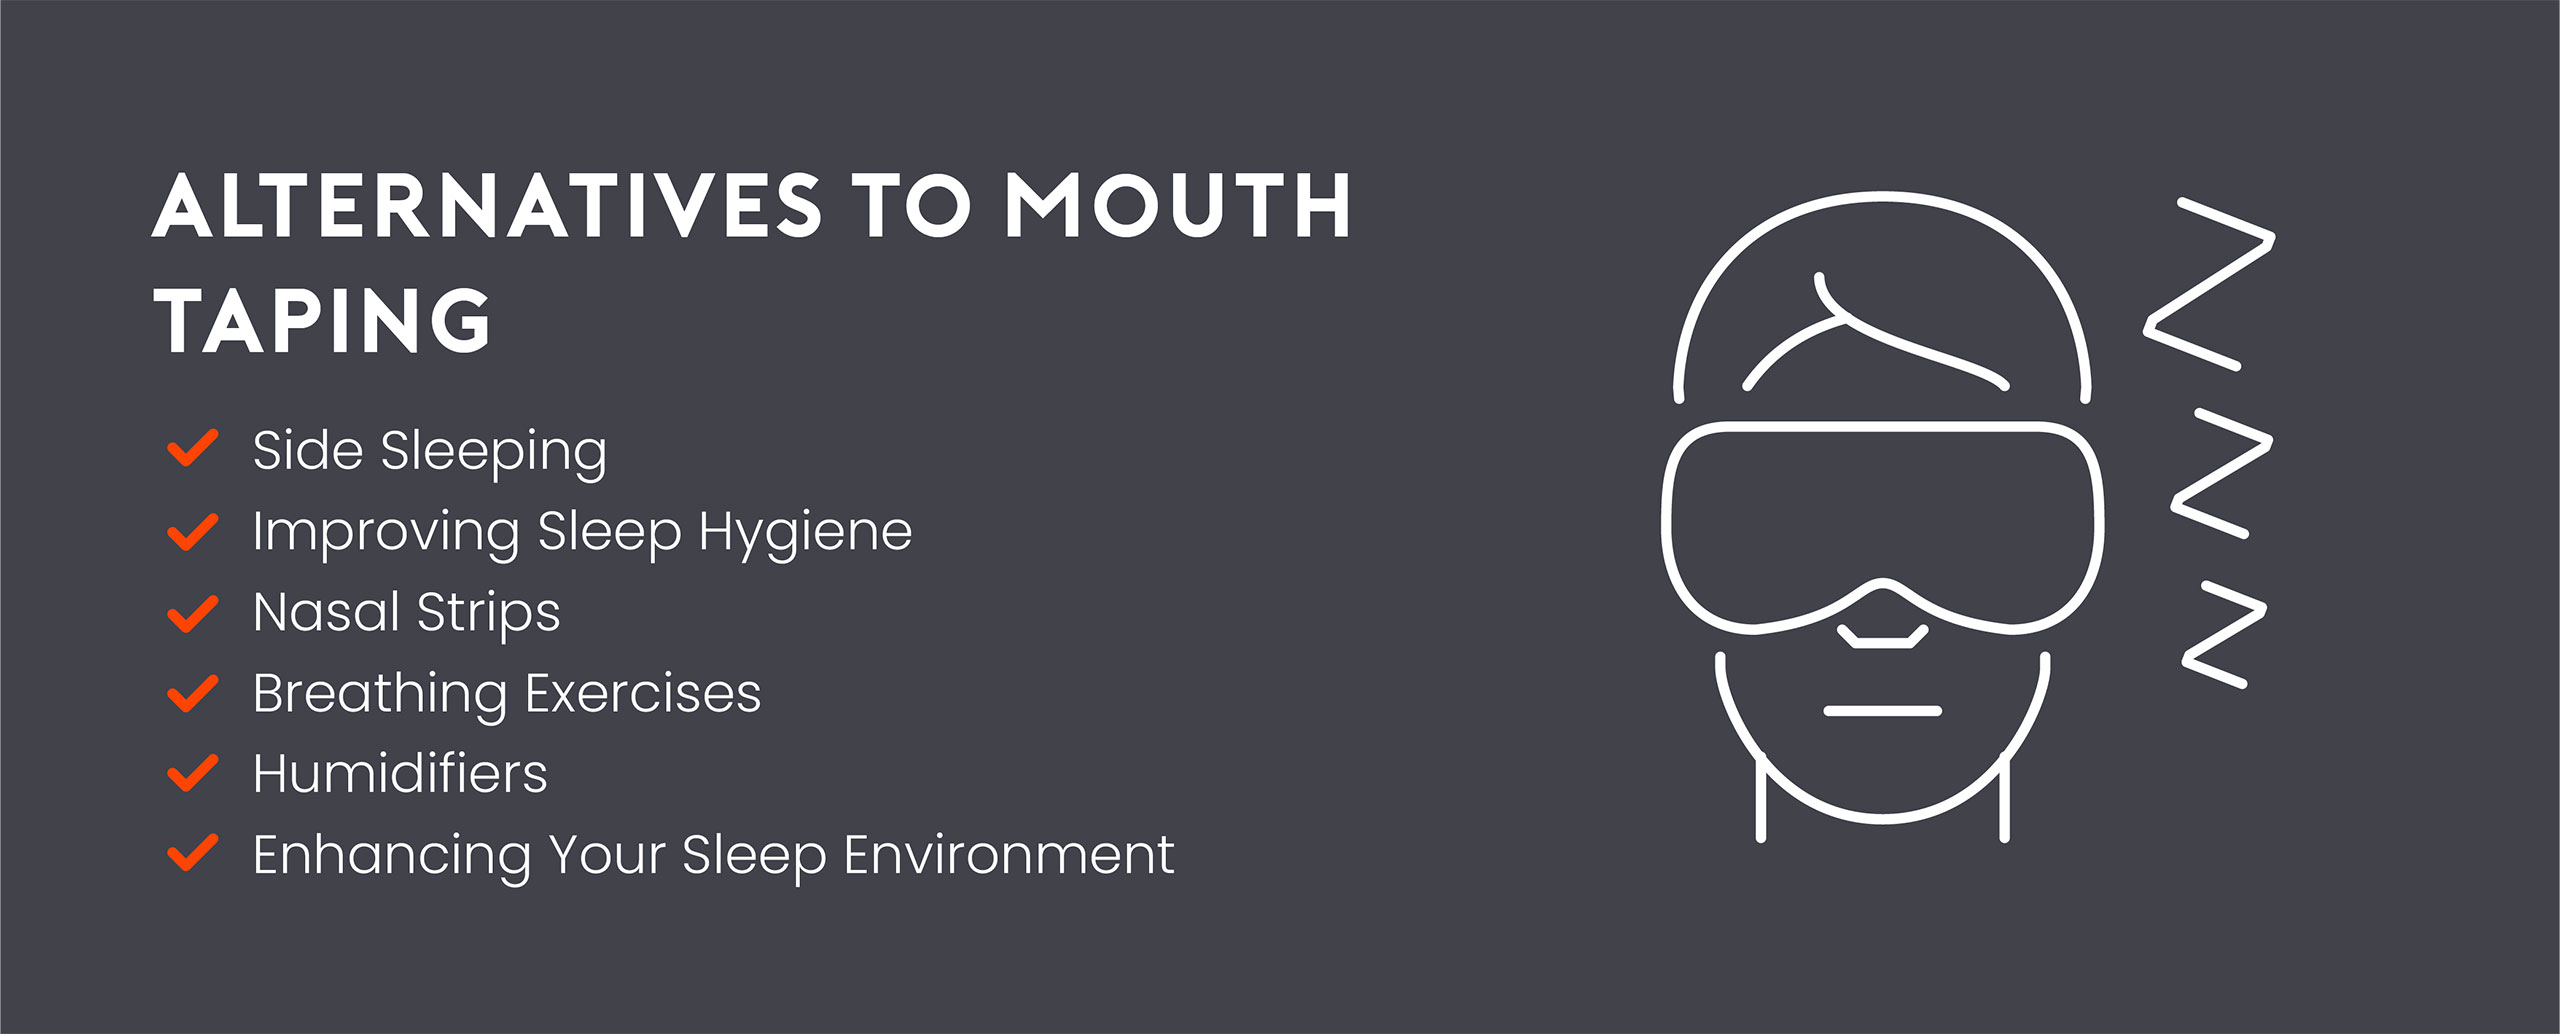 Alternatives to mouth taping